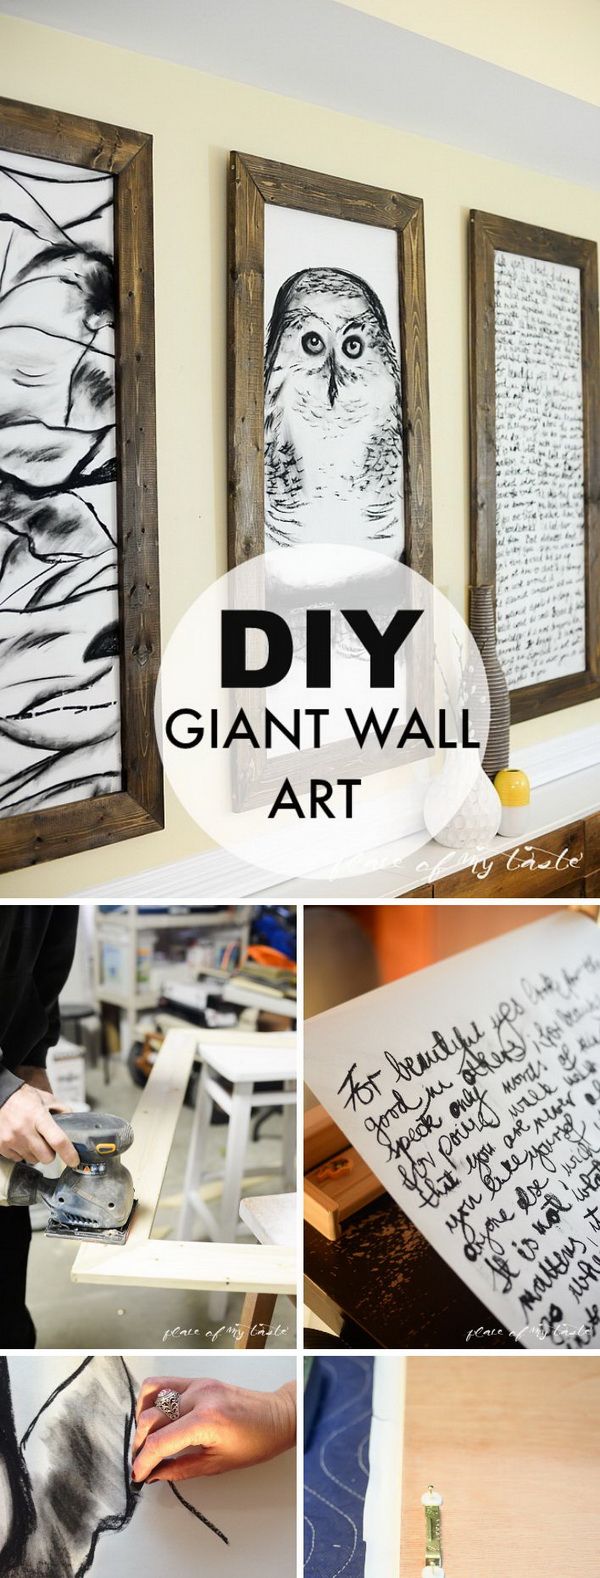 40 Rustic Wall Decor Diy Ideas 2017 With Regard To Current Peace I Leave With You Wall Hangings (Gallery 19 of 20)